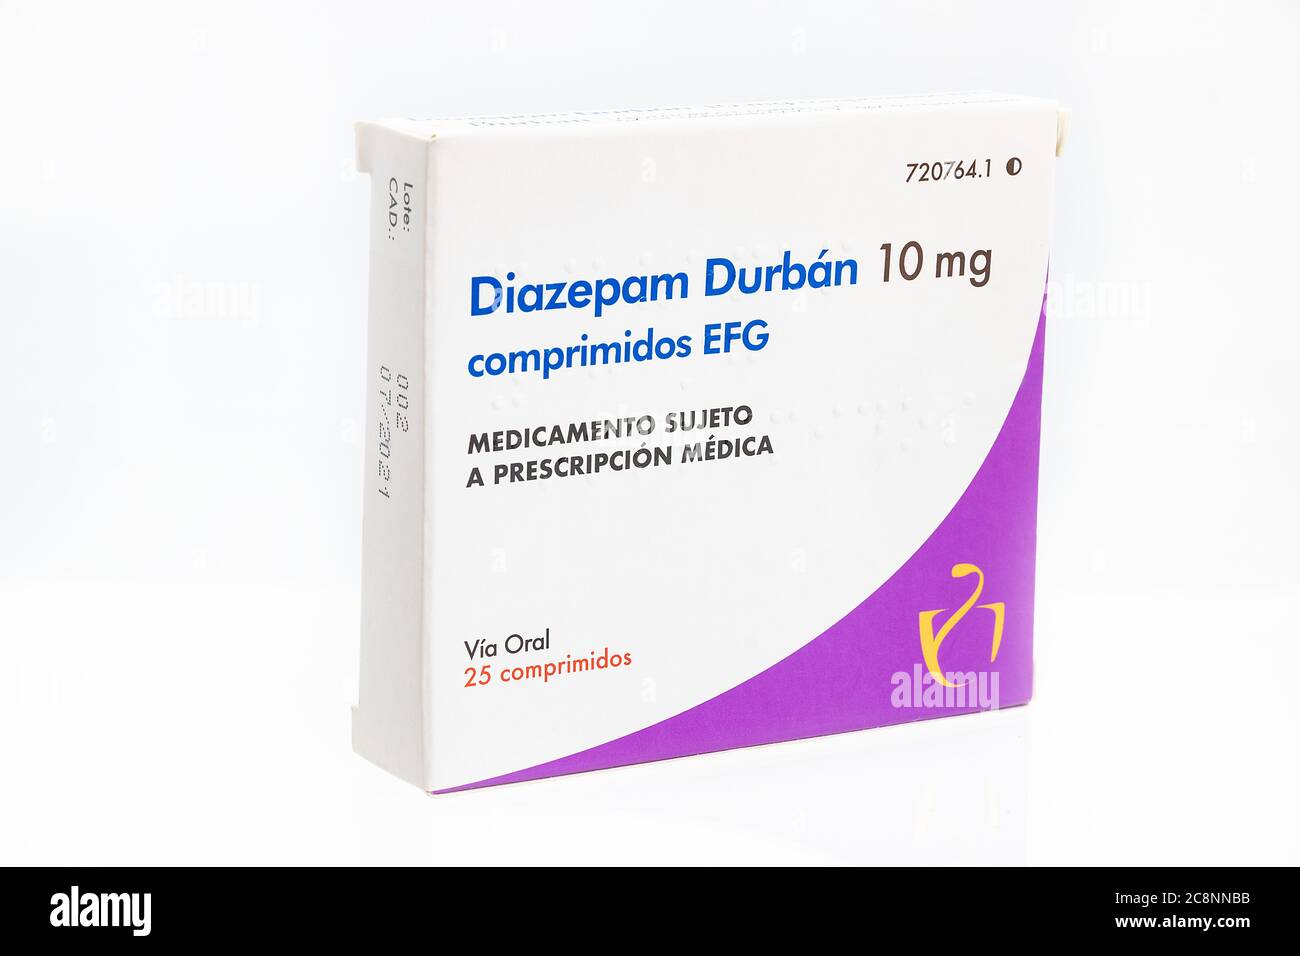 Huelva, Spain - July 23, 2020: Spanish Box of Diazepam brand Durban. Diazepam, first marketed as Valium, is a medicine of the benzodiazepine family th Stock Photo